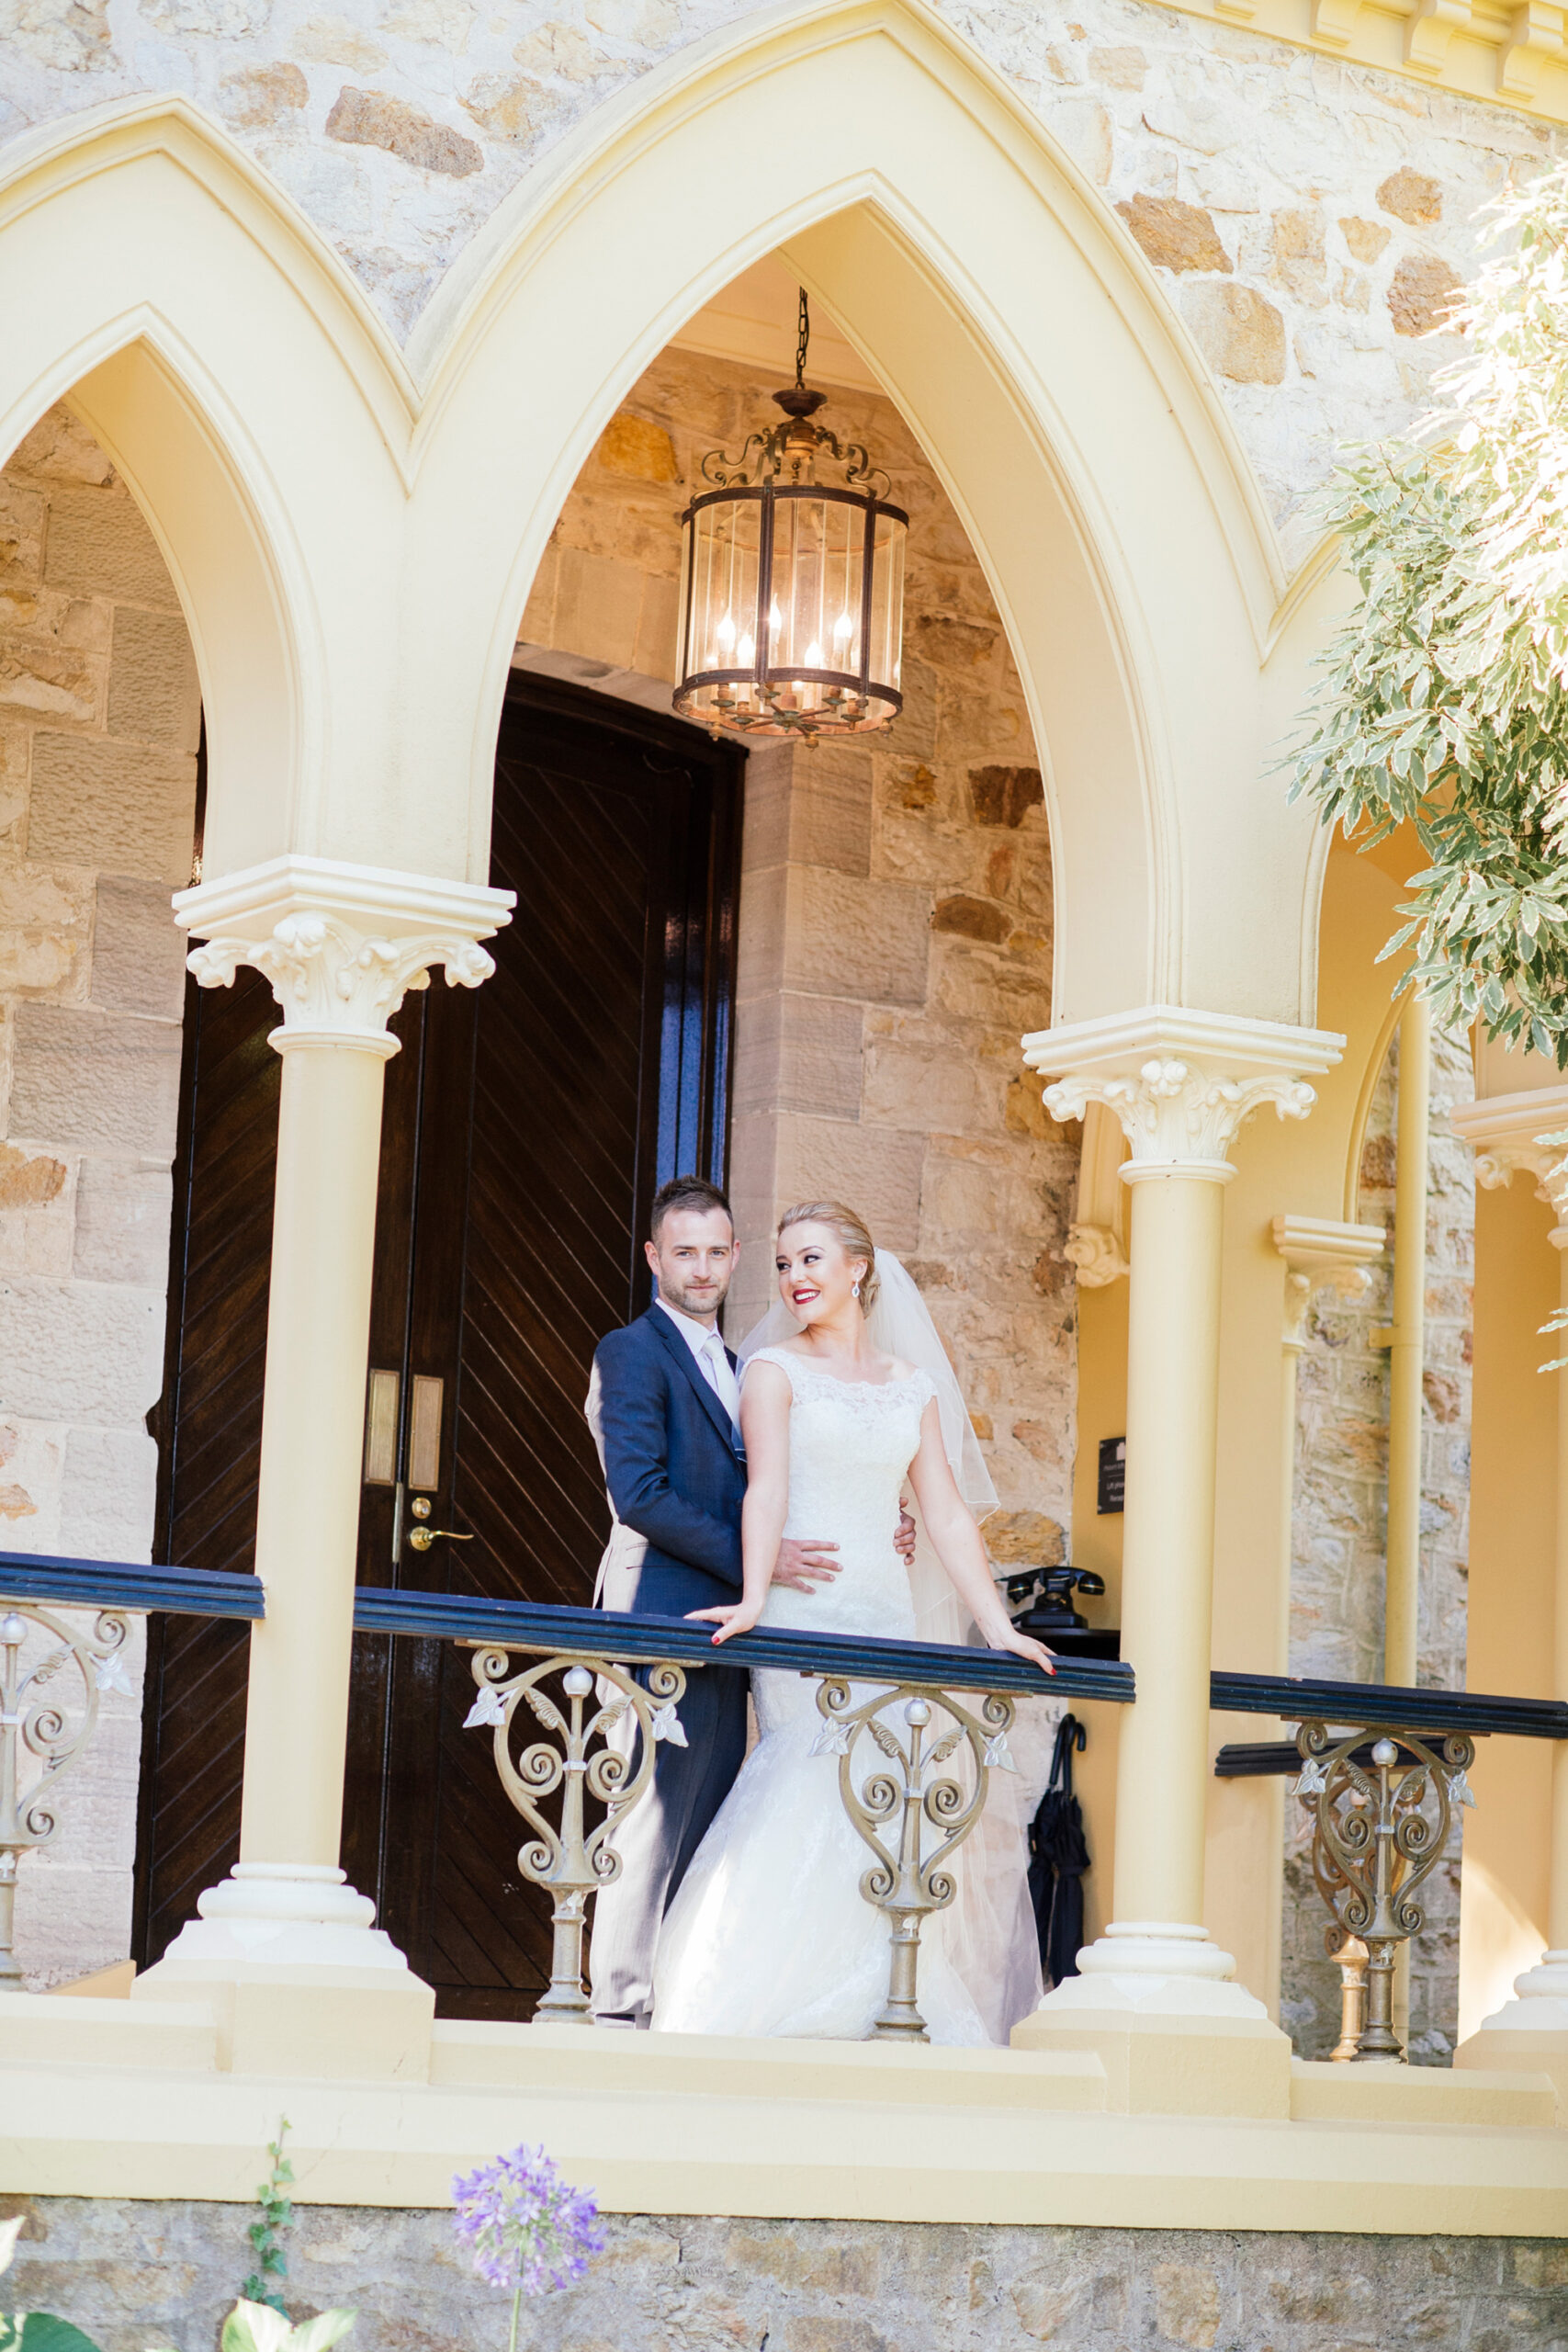 Katie Justin Classic Romantic Wedding Nicholas Purcell Photography SBS 025 scaled